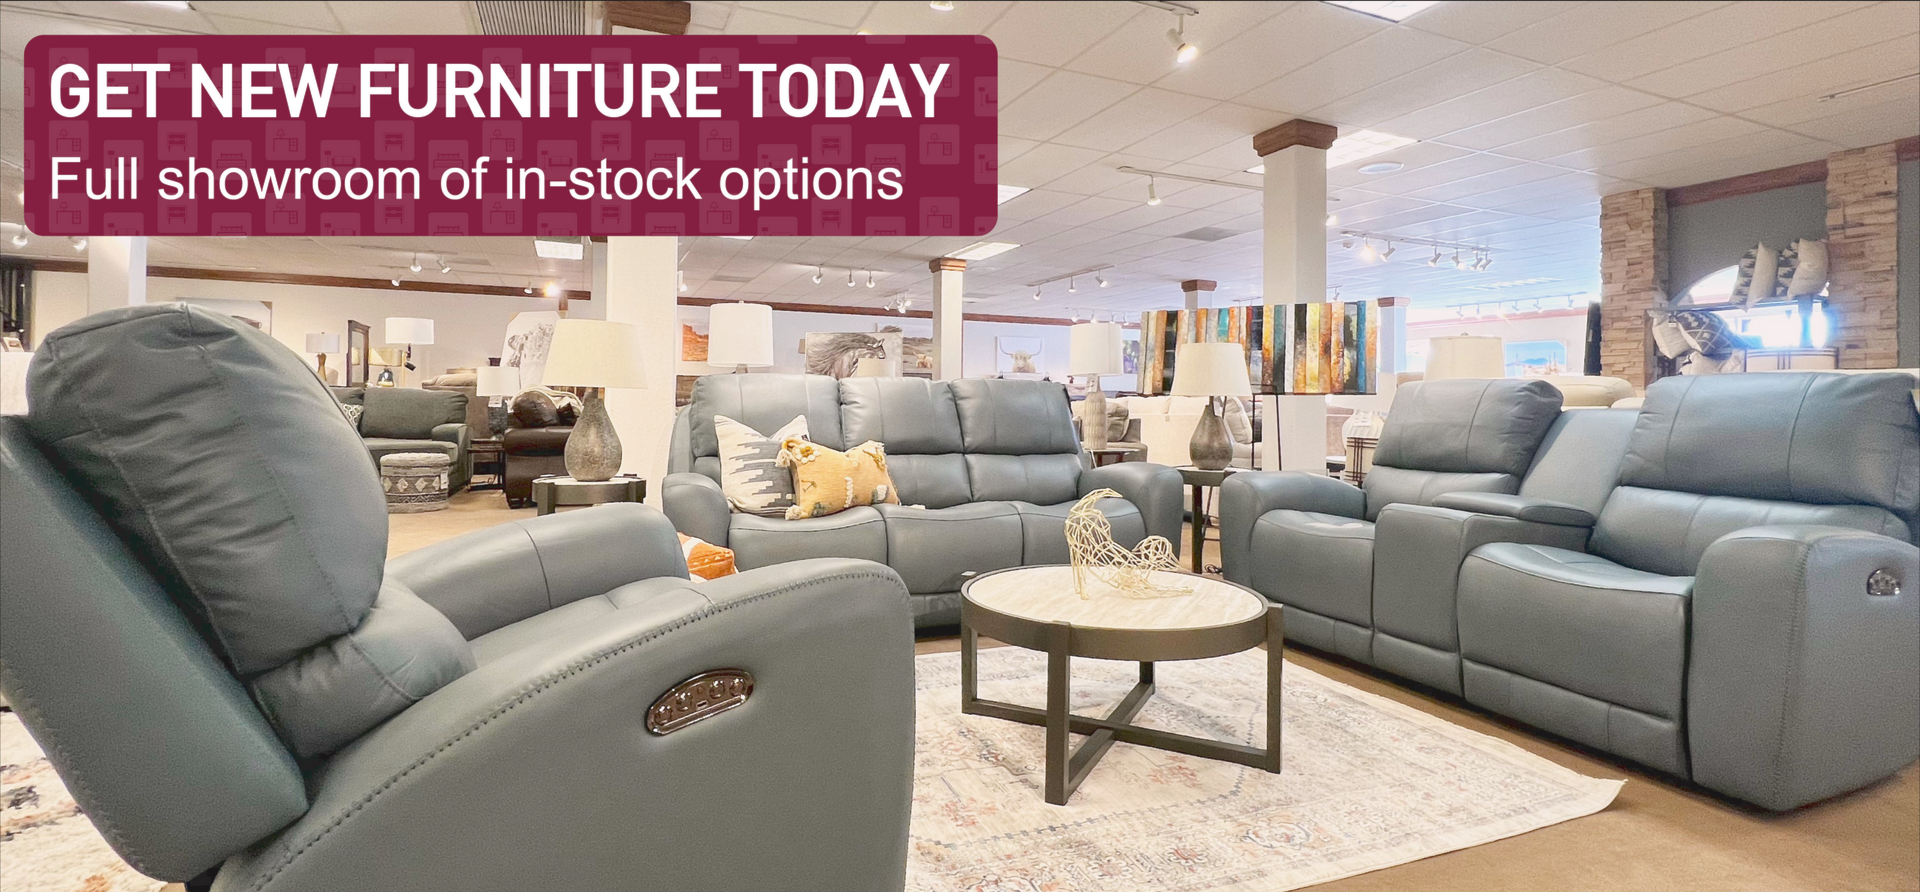 Home Furnishings Direct in-stock options